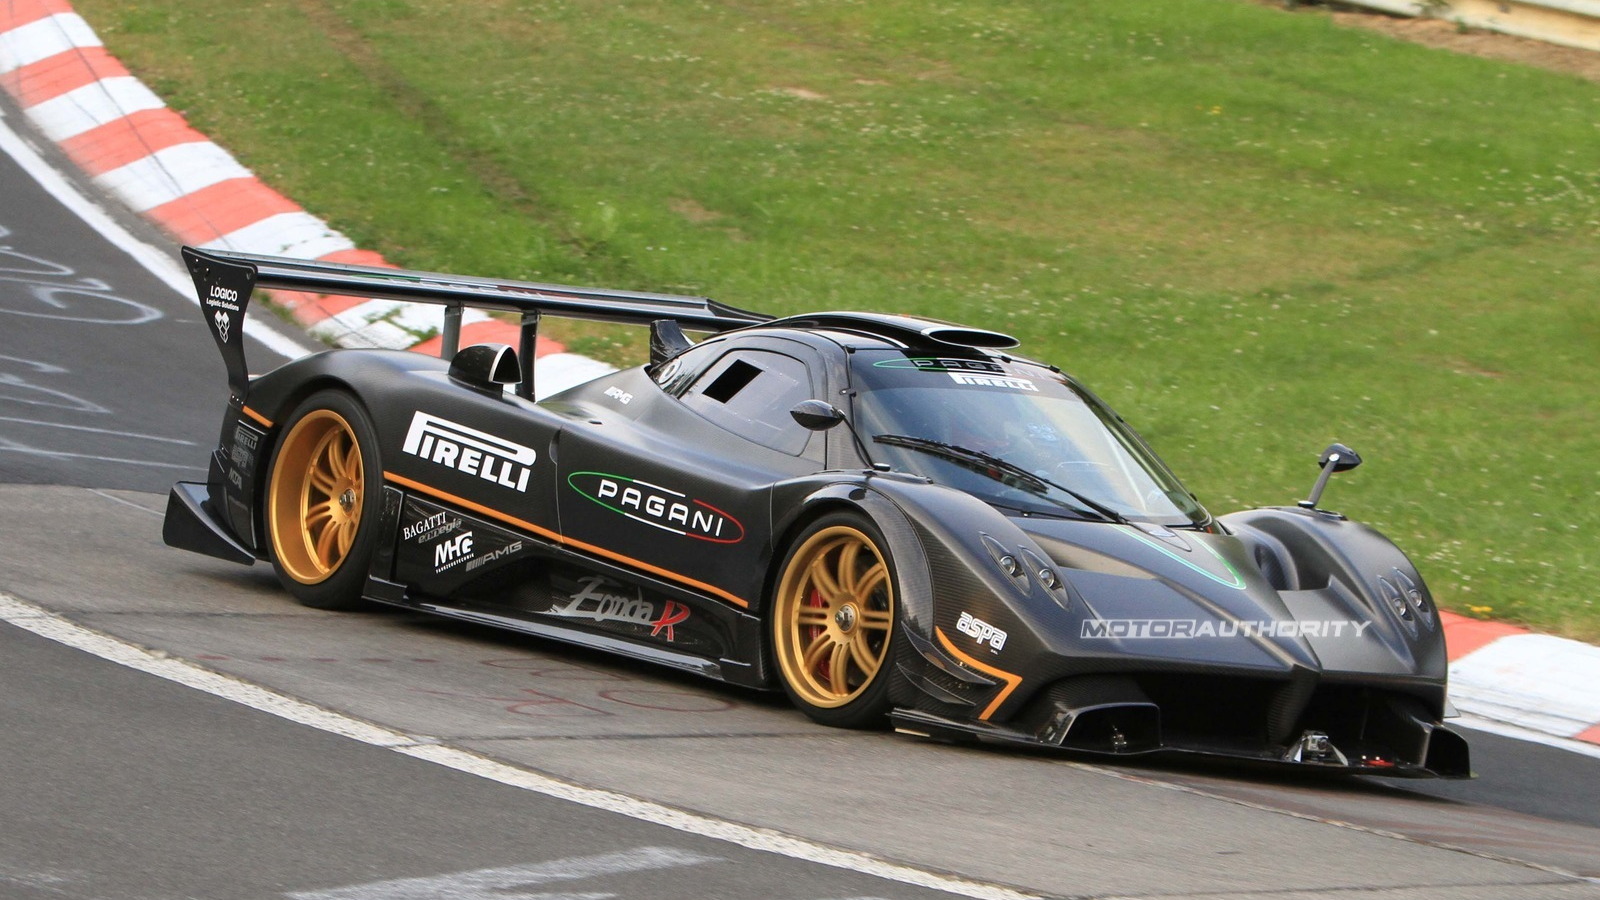 Pagani Zonda R spied on the 'Ring setting new 6:47 lap time